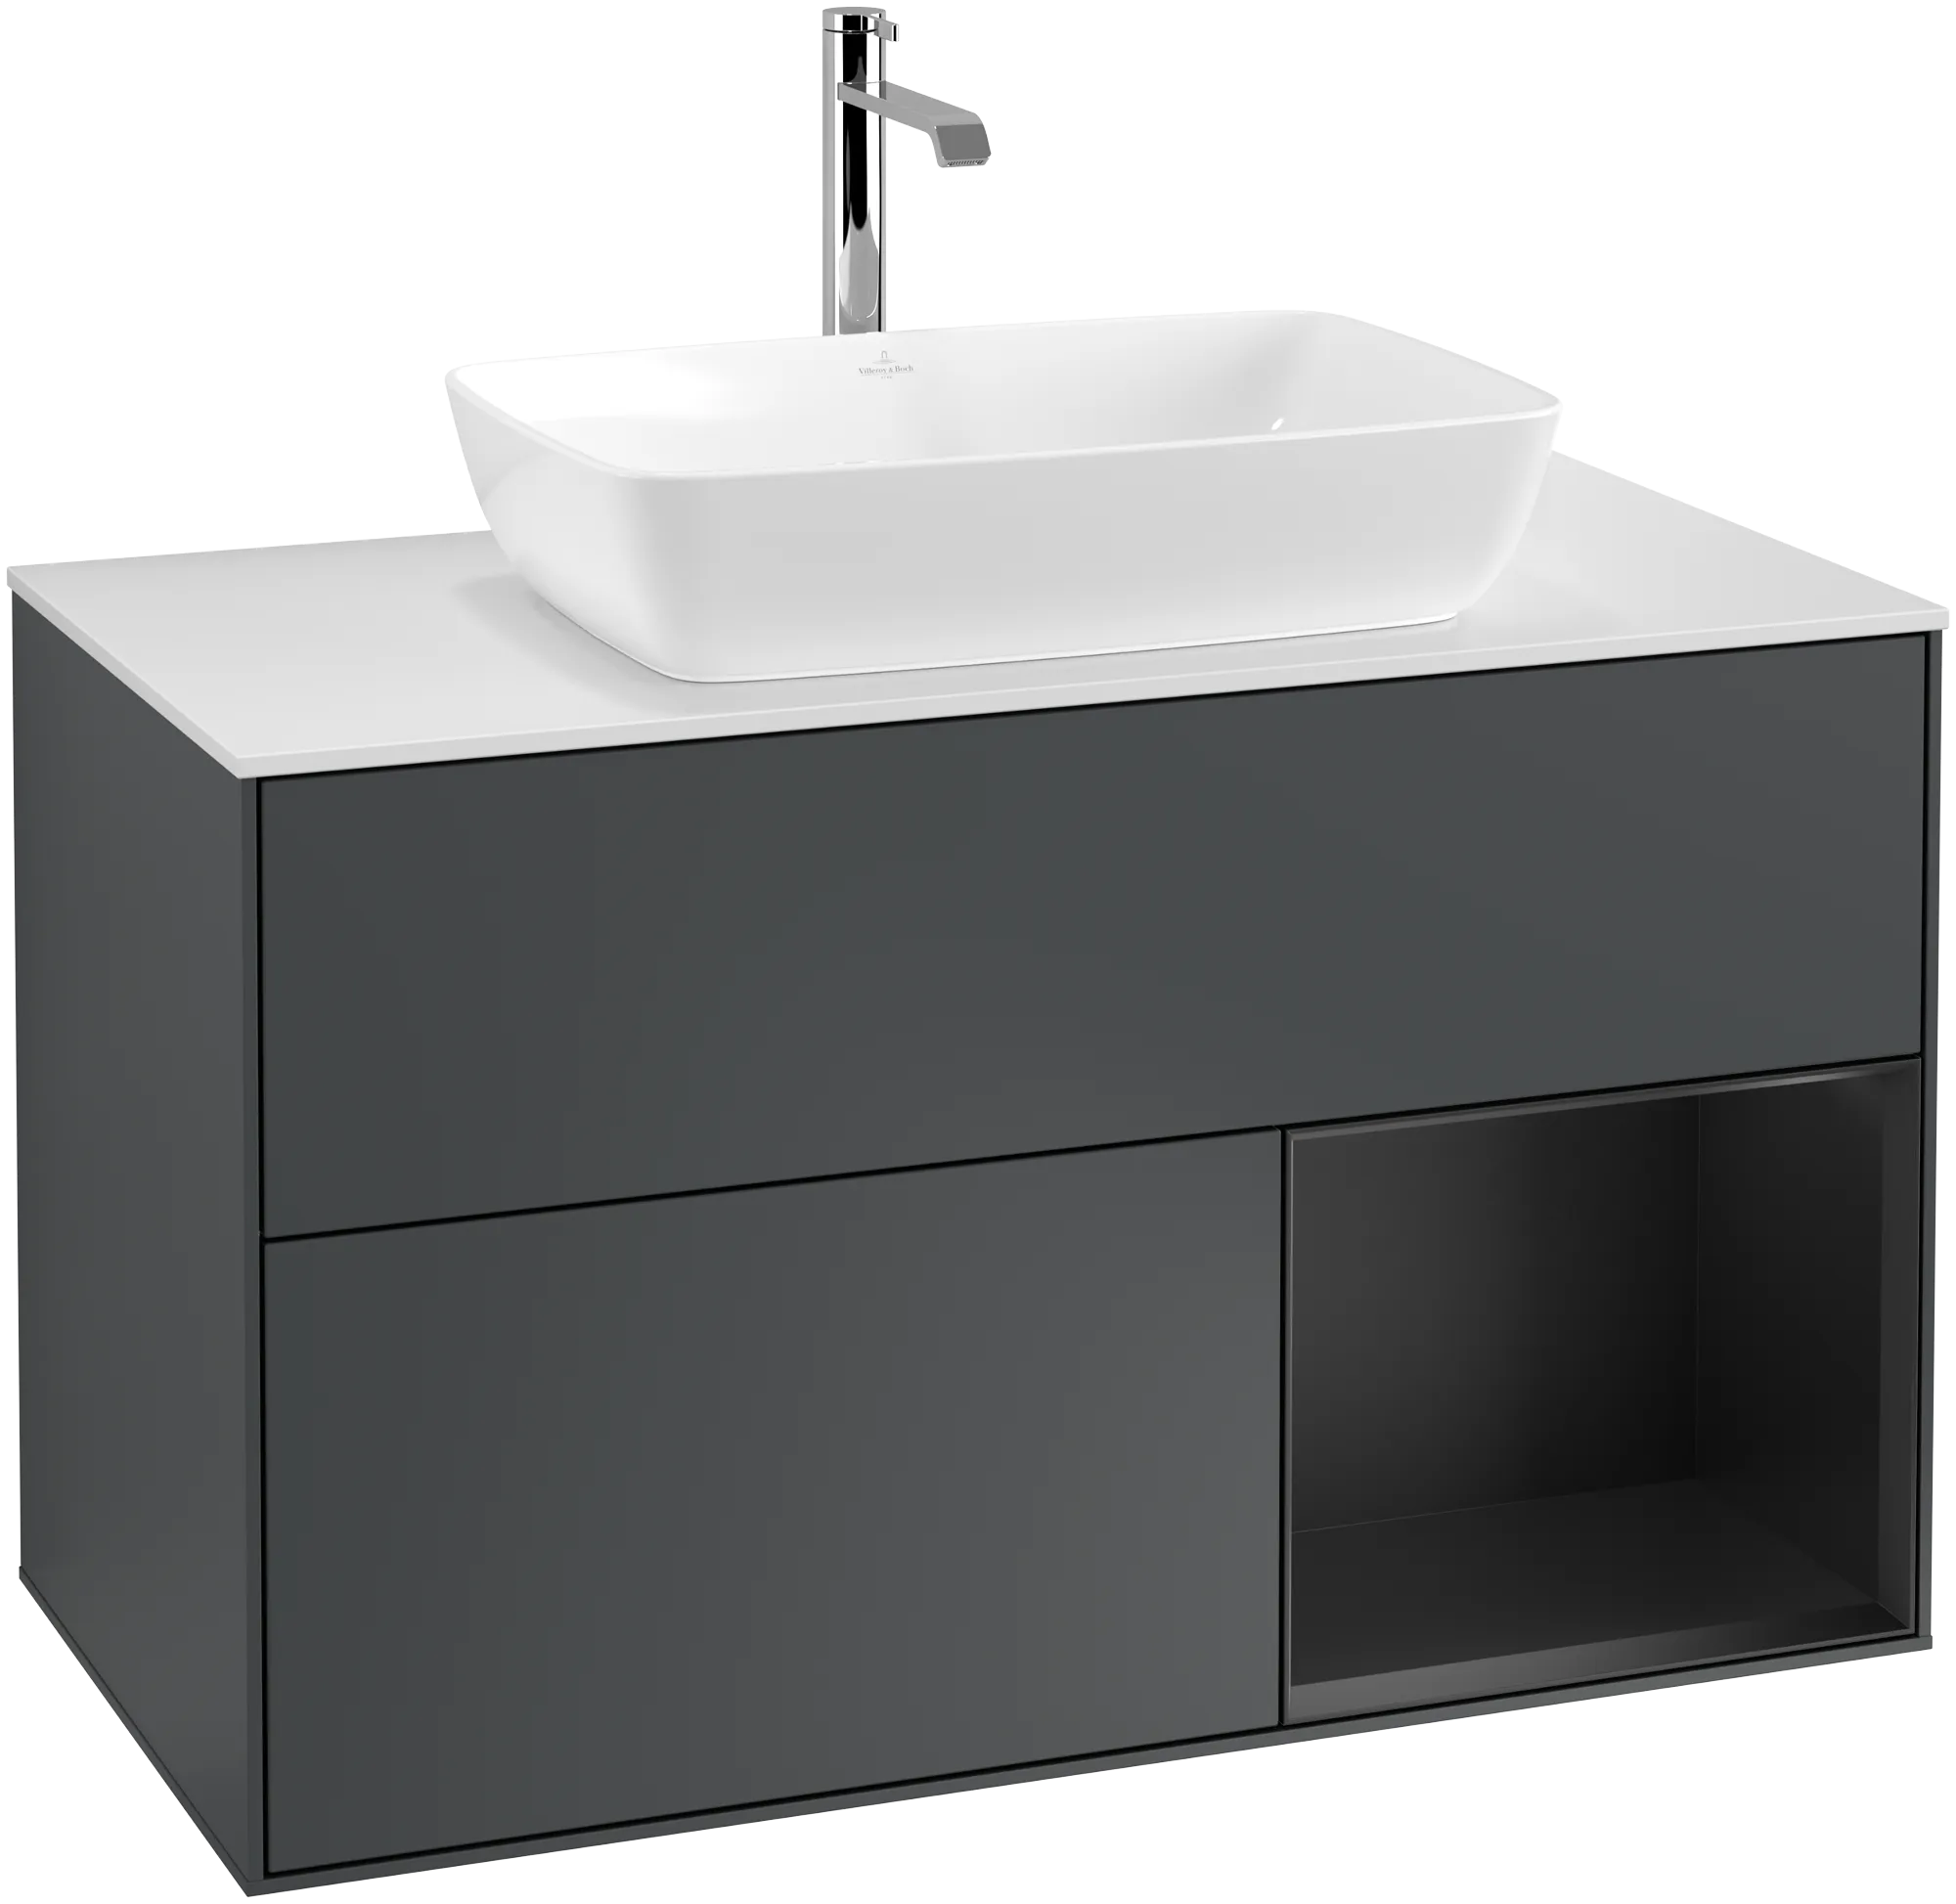 Picture of VILLEROY BOCH Finion Vanity unit, with lighting, 2 pull-out compartments, 1000 x 603 x 501 mm, Midnight Blue Matt Lacquer / Black Matt Lacquer / Glass White Matt #G781PDHG